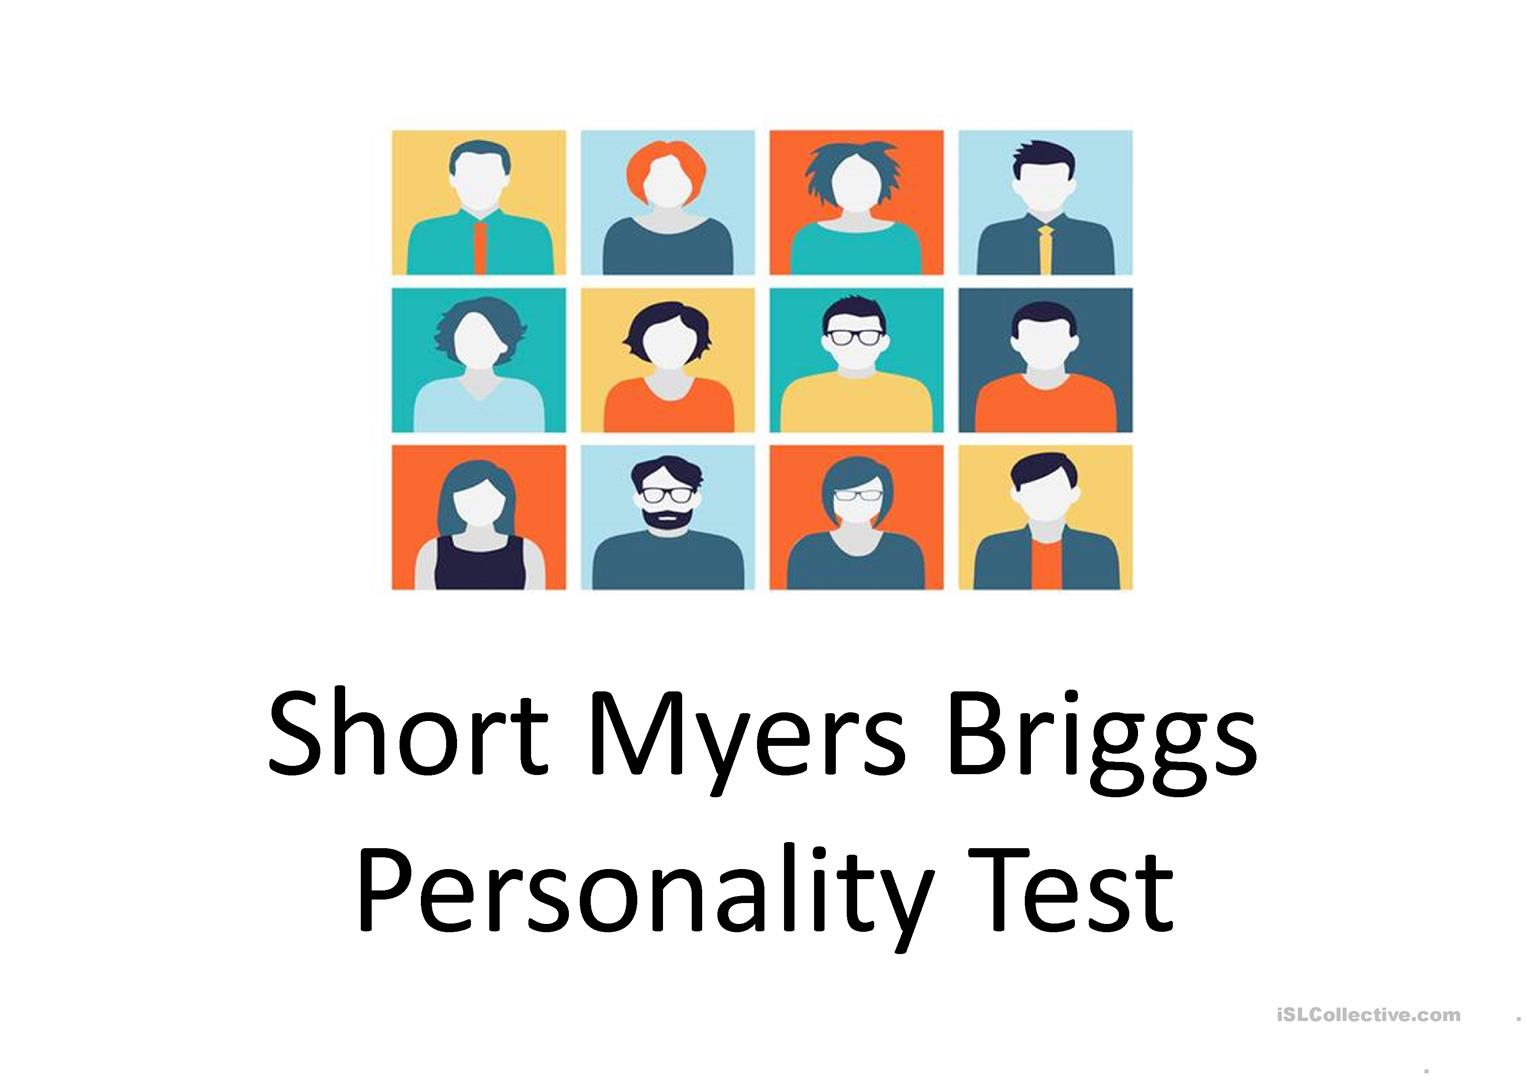 Short Myers Briggs Personality Test Worksheet - Free Esl Projectable - Free Printable Personality Test